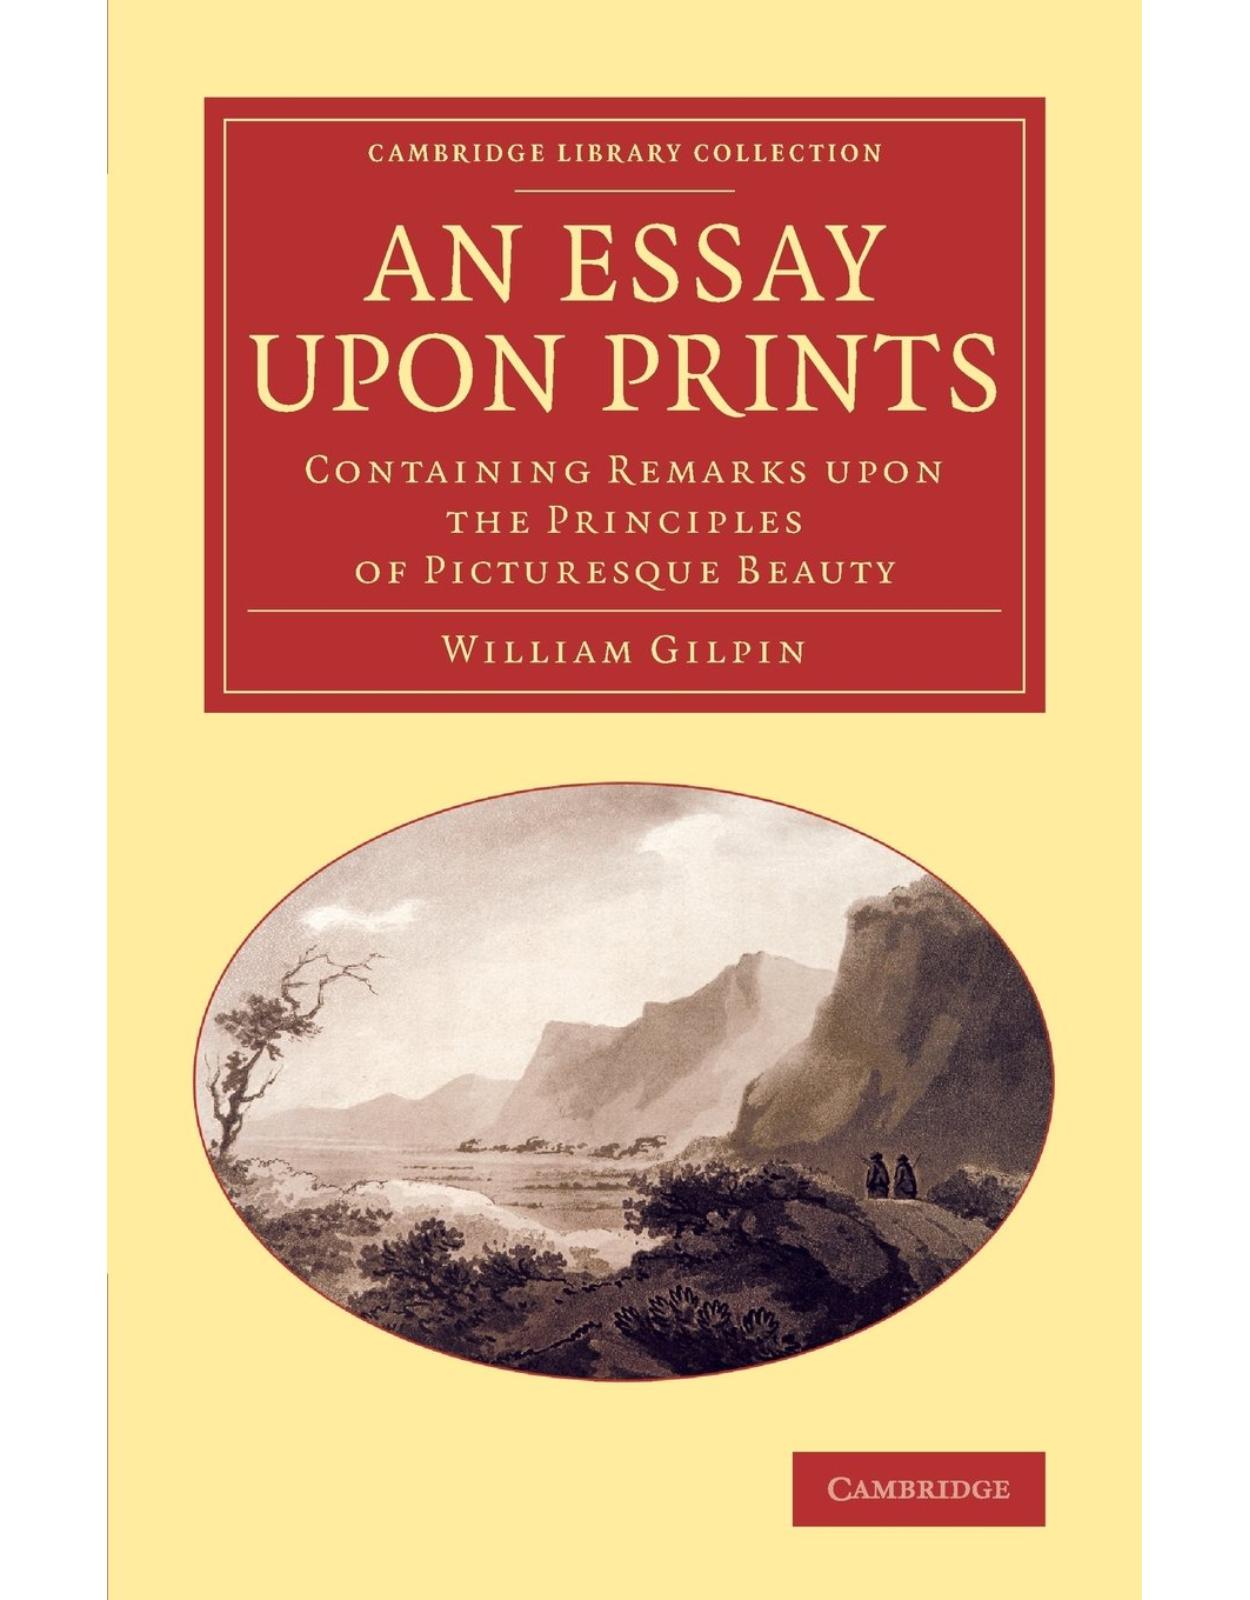 An Essay upon Prints: Containing Remarks upon the Principles of Picturesque Beauty (Cambridge Library Collection - Art and Architecture)